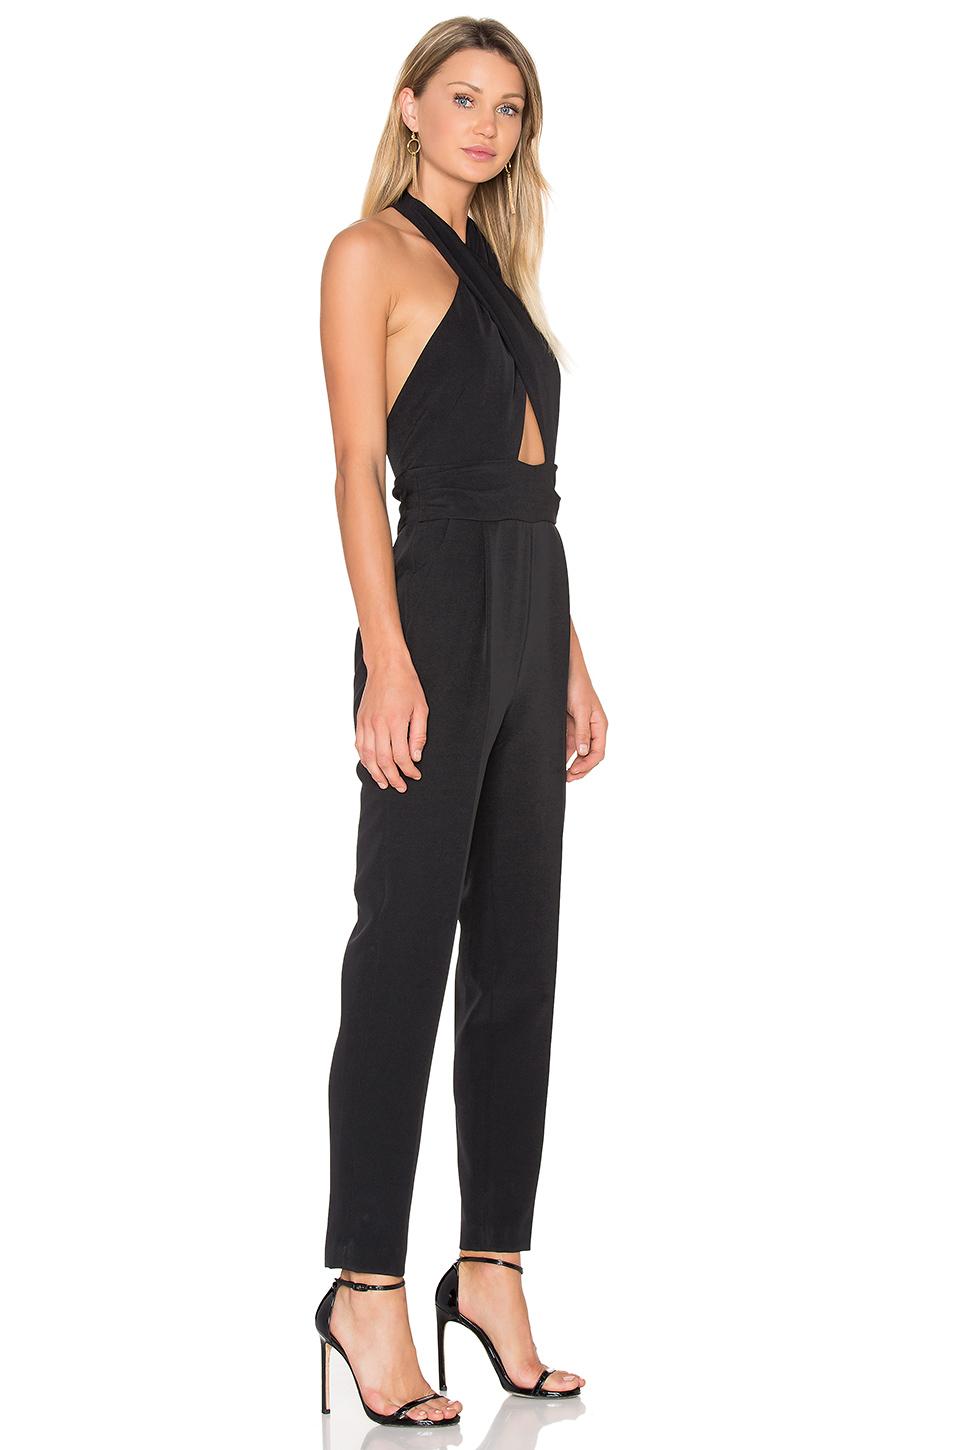 MILLY Cady Nicole Halter Jumpsuit in Black - Lyst